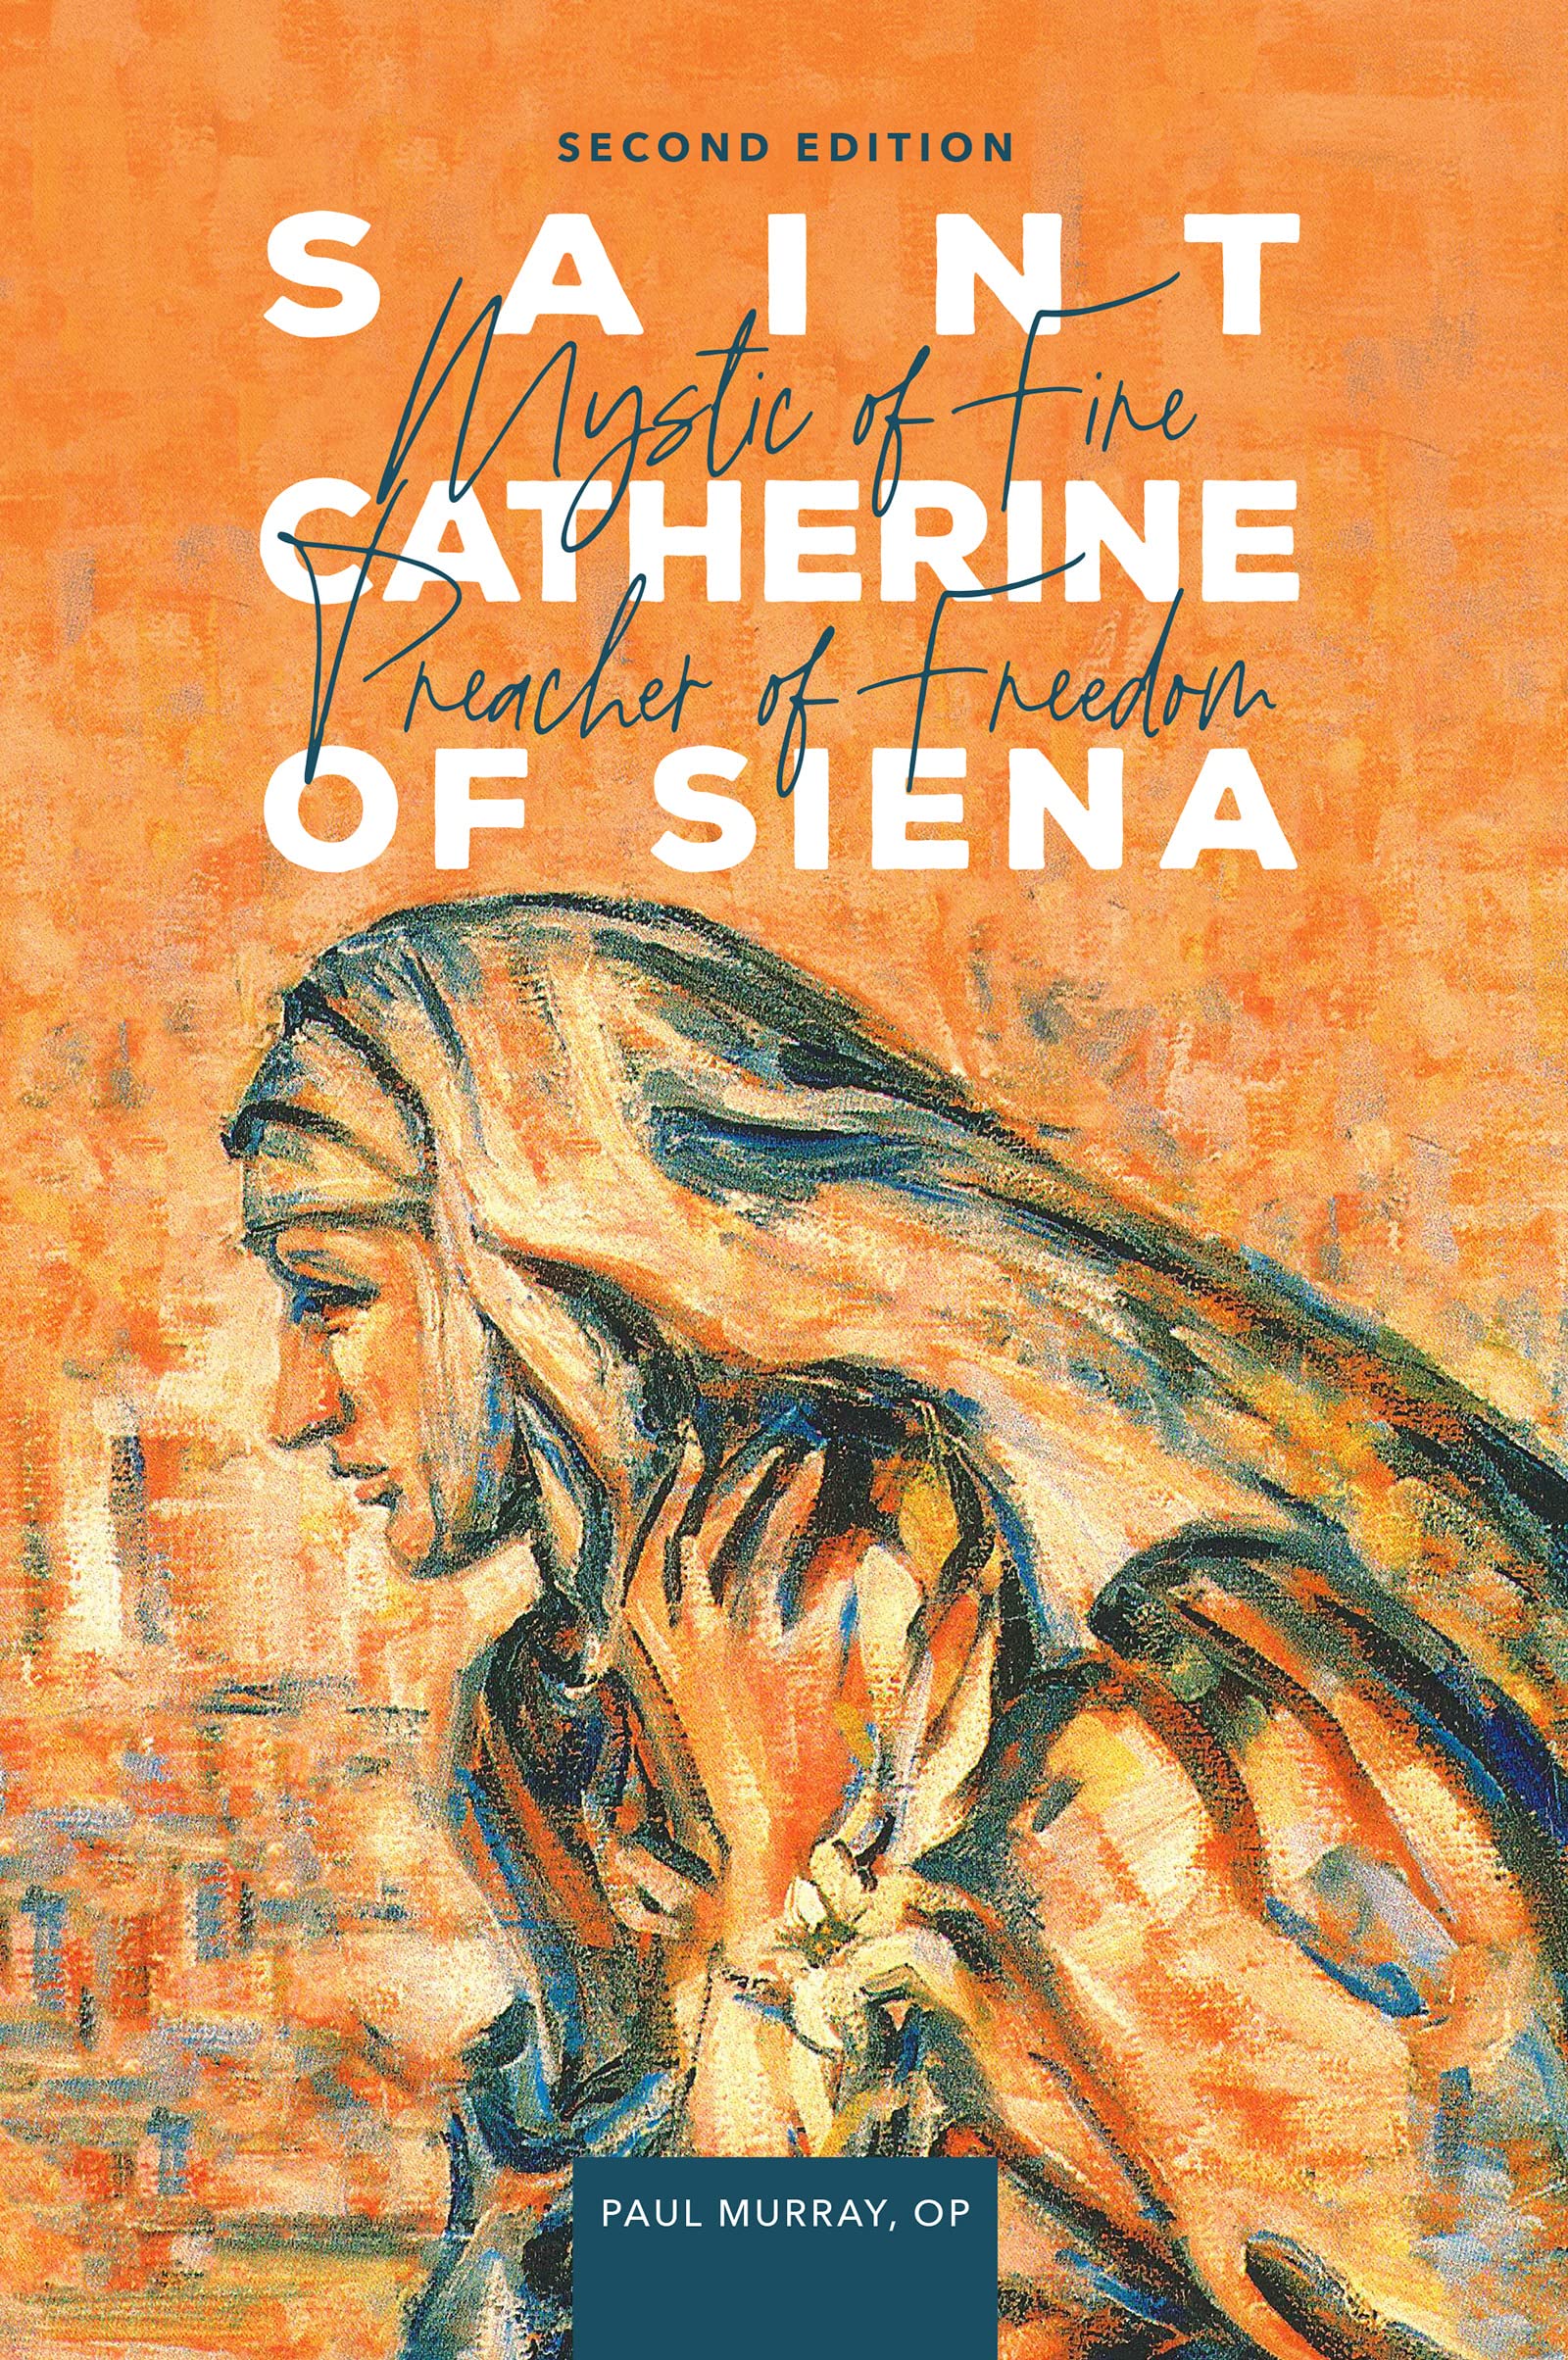 Saint Catherine of Siena: Mystic of Fire, Preacher of Freedom Second Edition